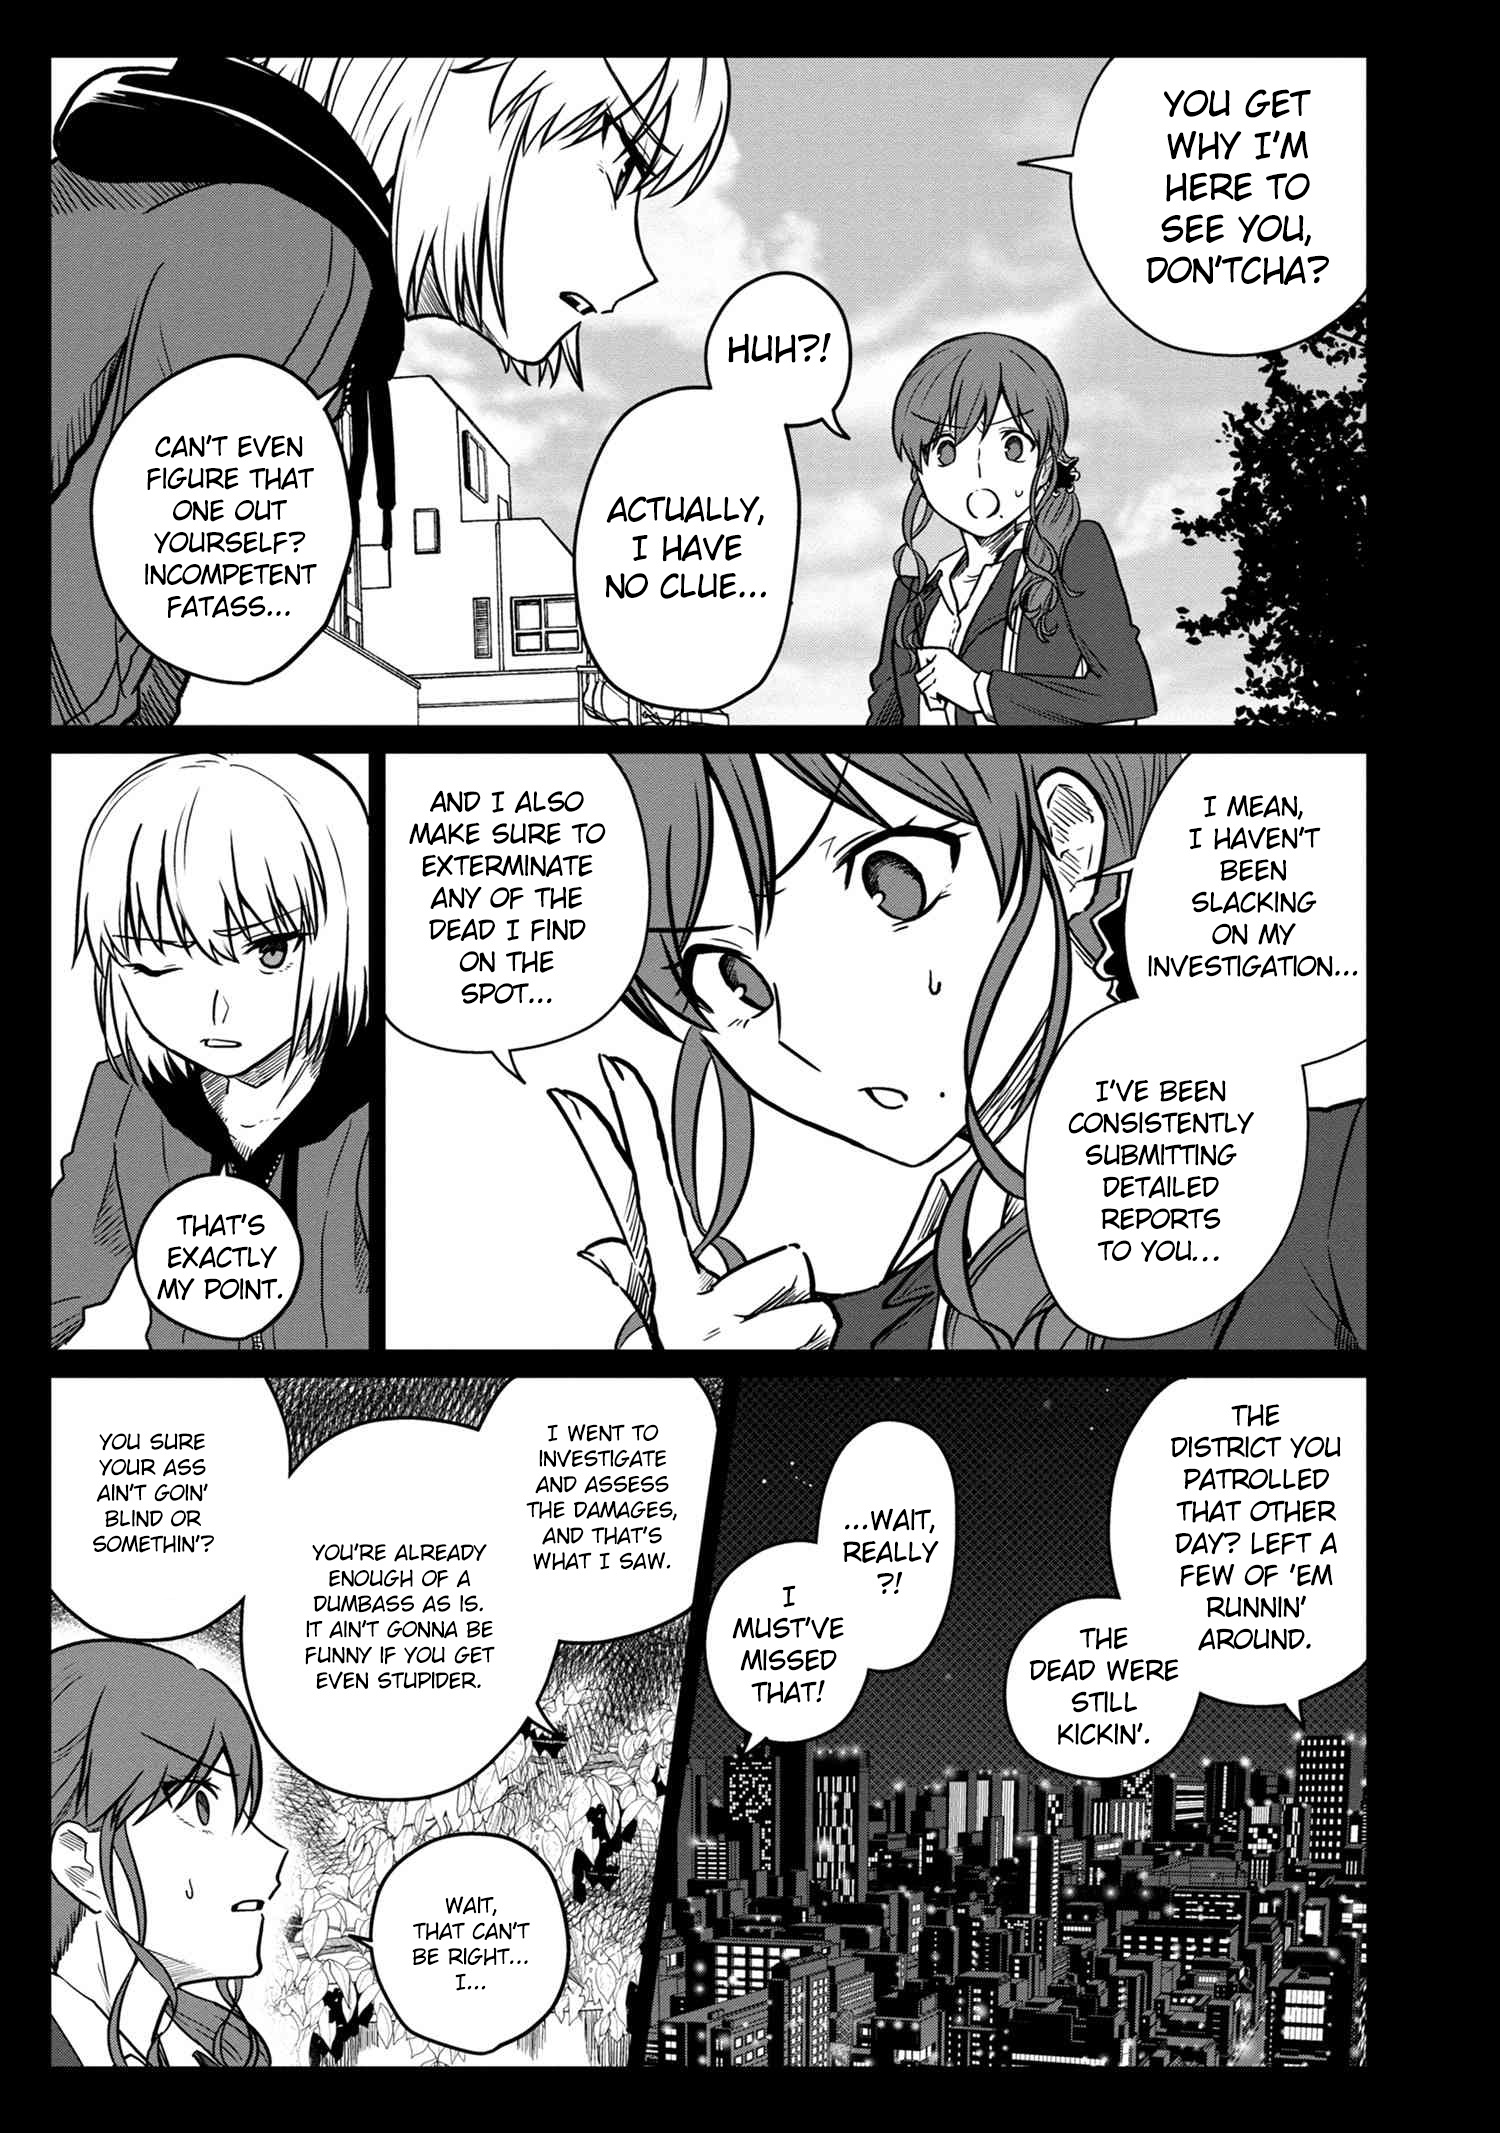 Melty Blood: Type Lumina Piece In Paradise - chapter 6.1 - #5